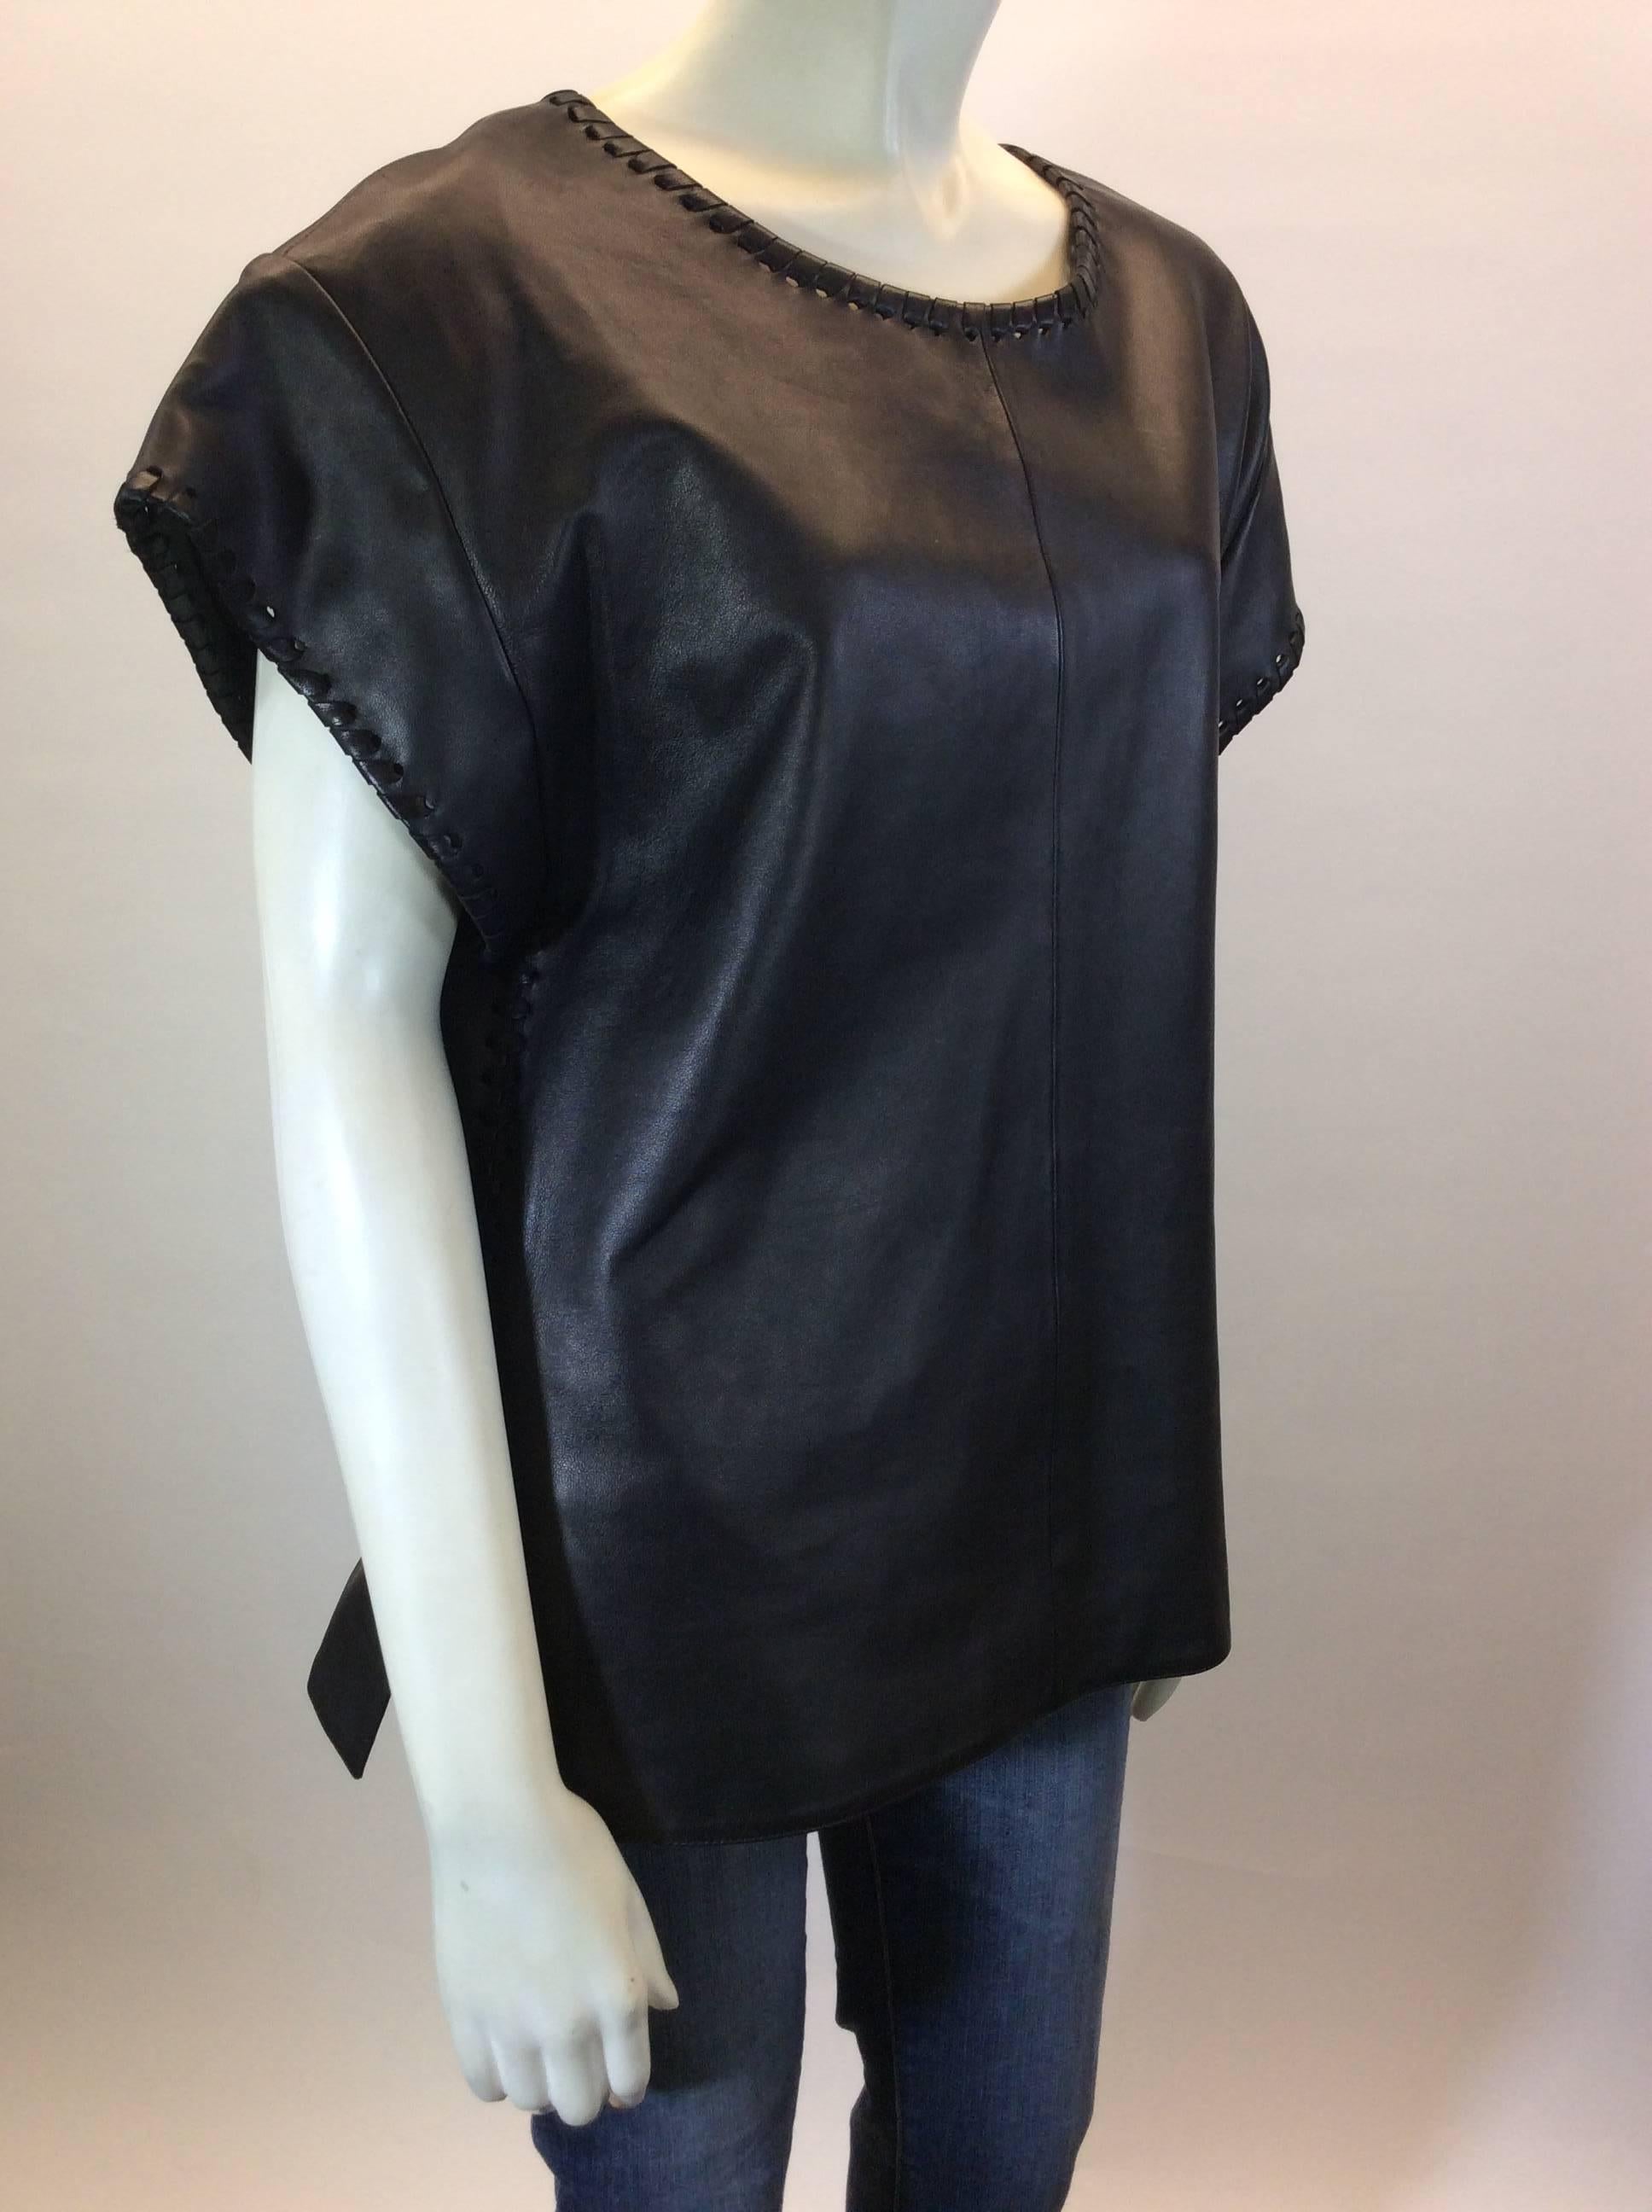 Chloe Black Leather Lambskin Short Sleeve Top  In Excellent Condition For Sale In Narberth, PA